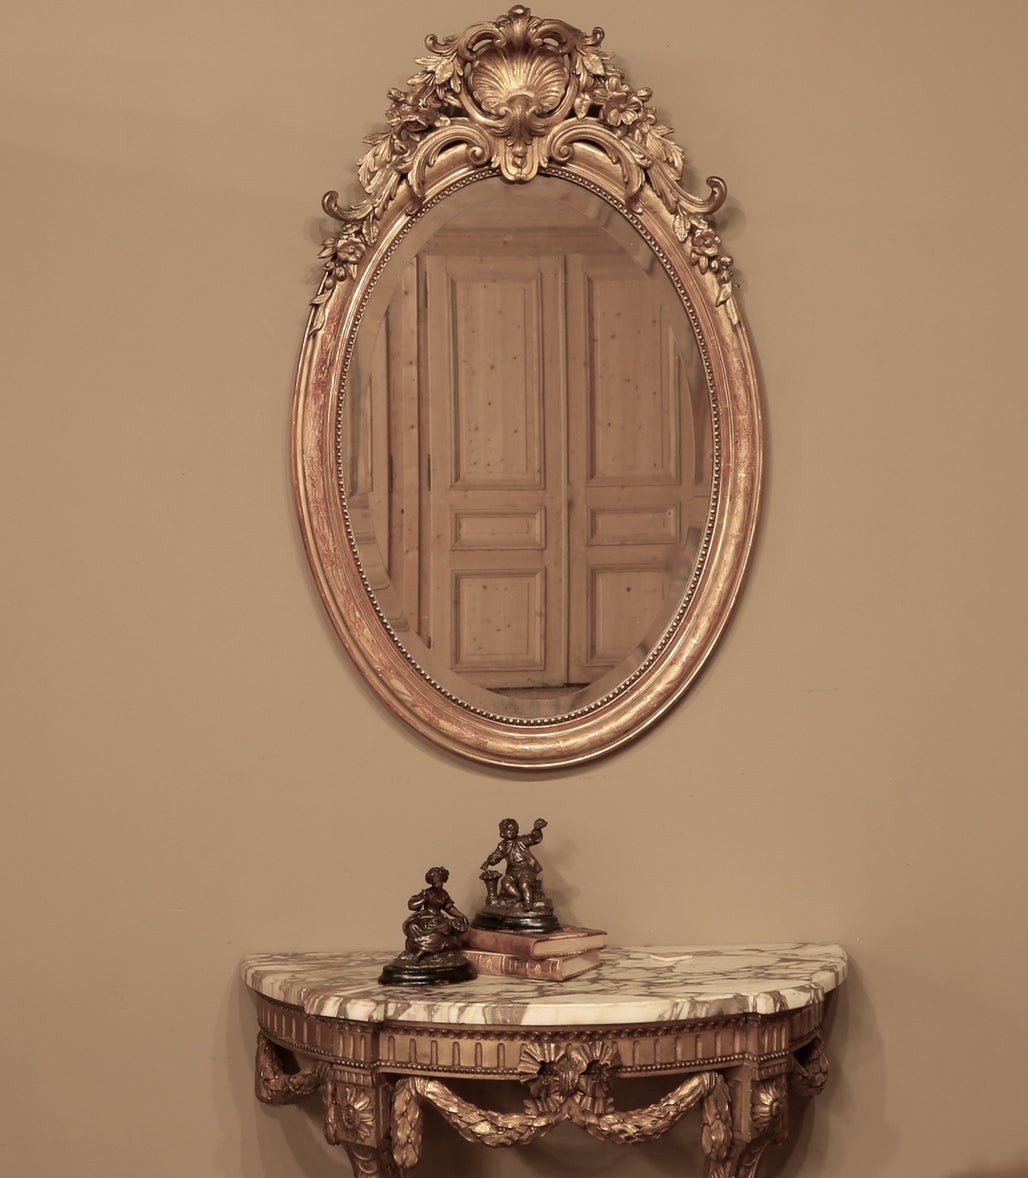 Elegant 19th Century French Neoclassical Gilded Oval Mirror adds beauty, form and function to any room! Featuring a shell cartouche on top lavished with floral and foliate motifs that cascade down the oval frame, which in turn features a subtle